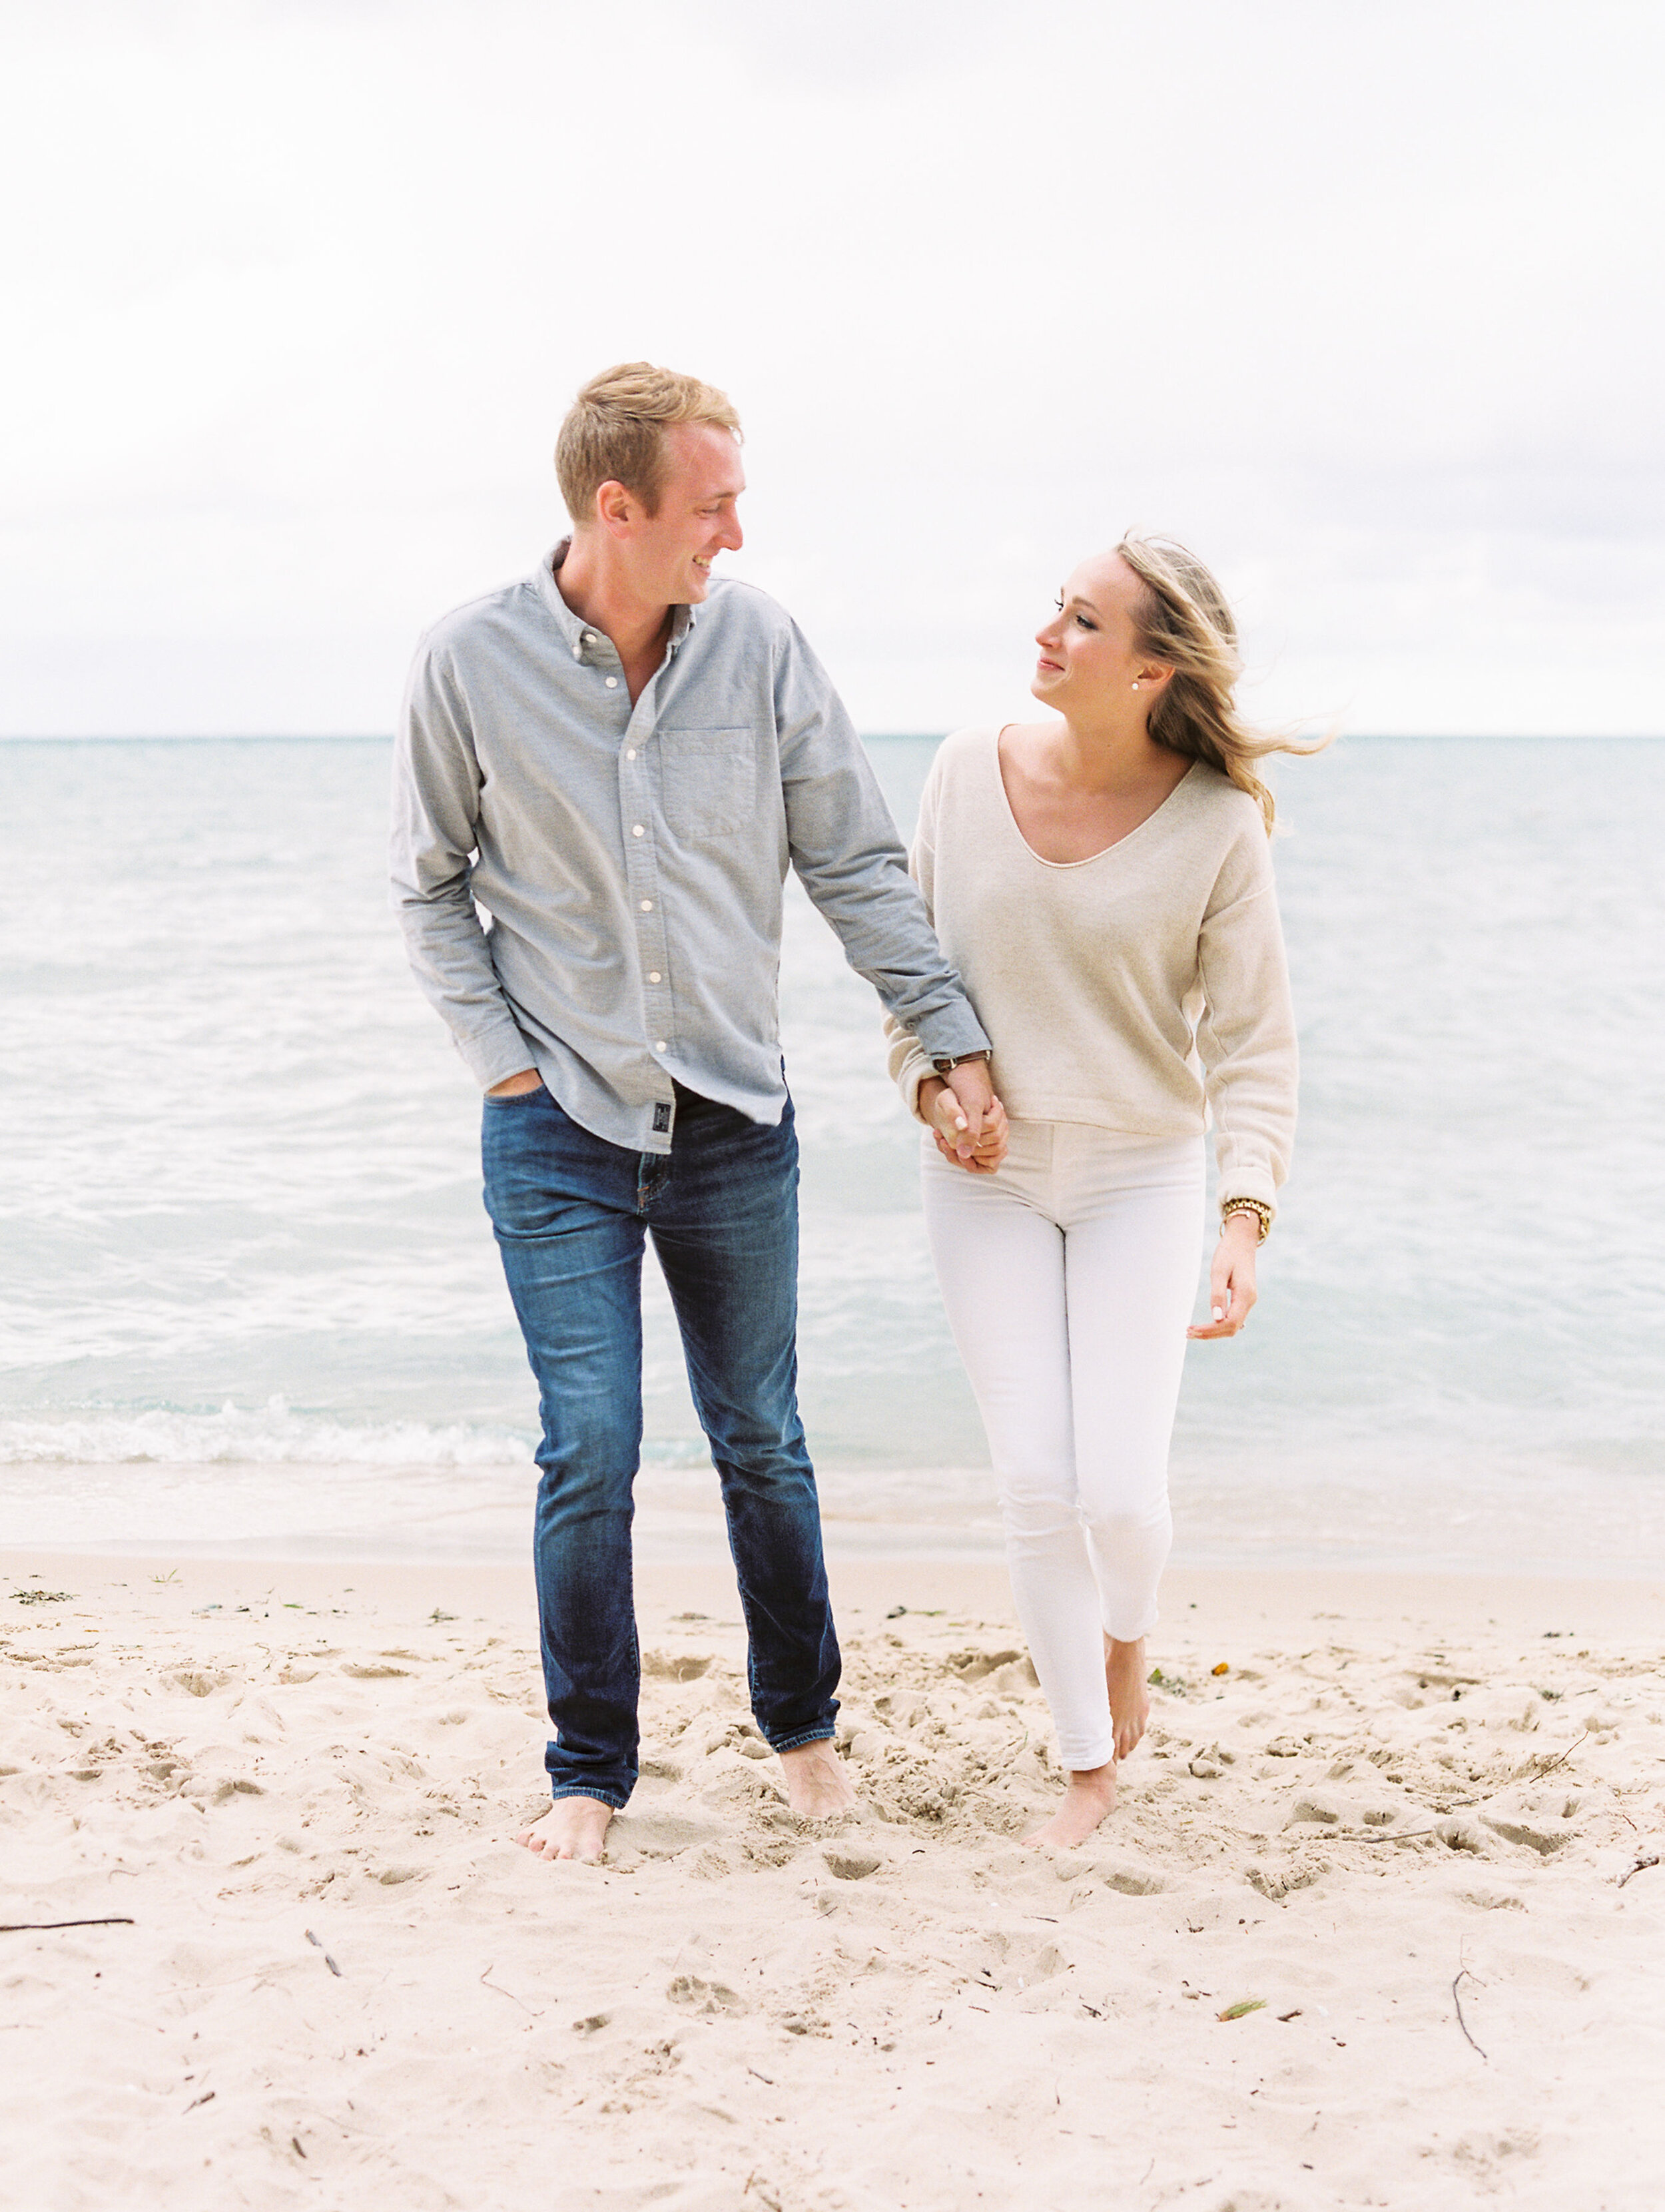 Molly+Connor+Engaged-94.jpg